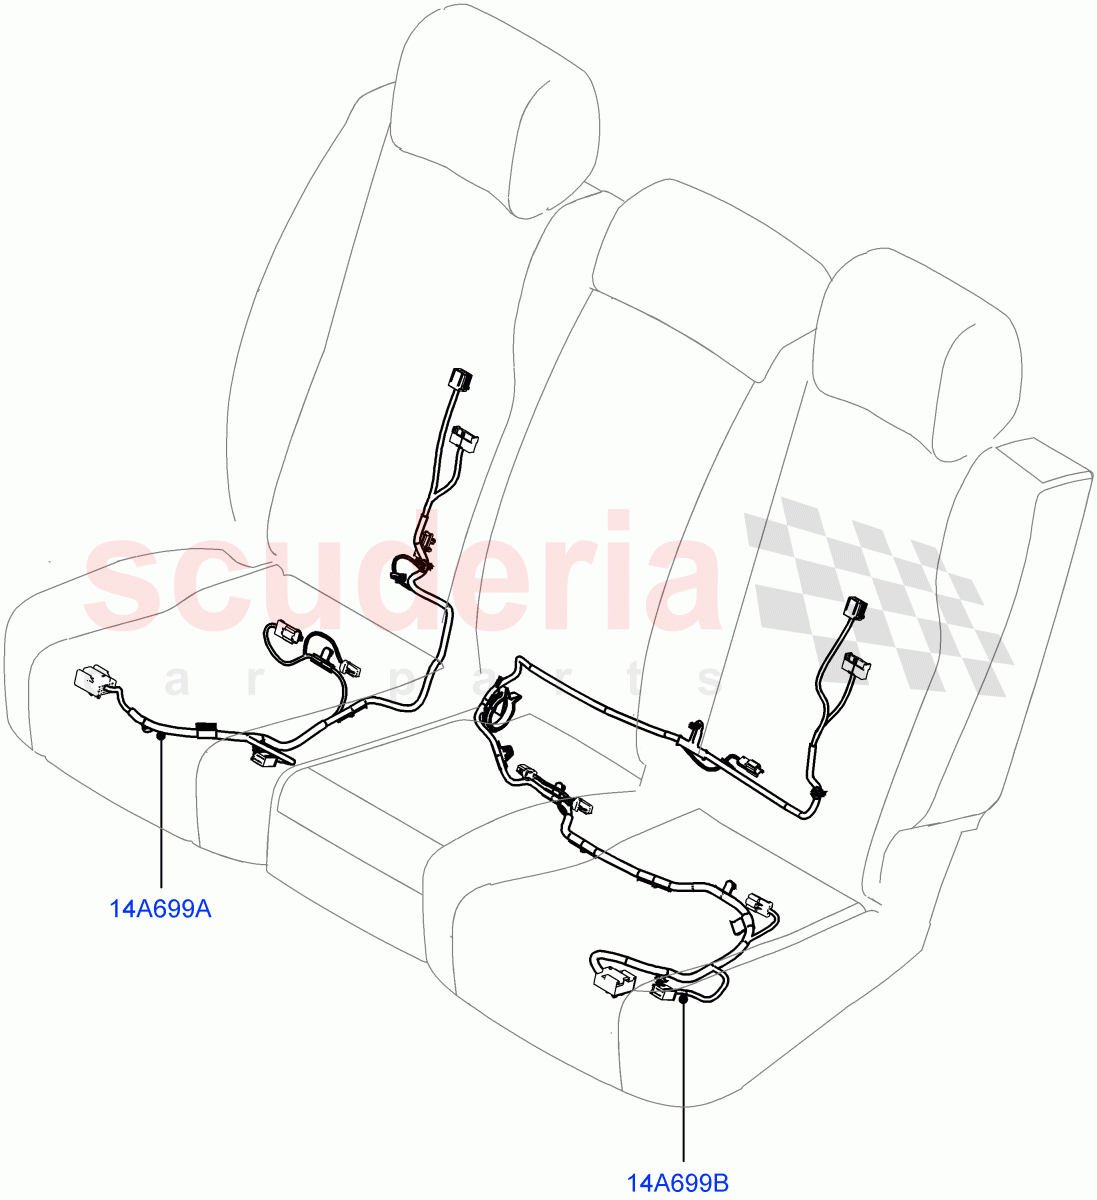 Wiring - Seats(Rear Seats)((V)FROMJA000001) of Land Rover Land Rover Range Rover Sport (2014+) [4.4 DOHC Diesel V8 DITC]